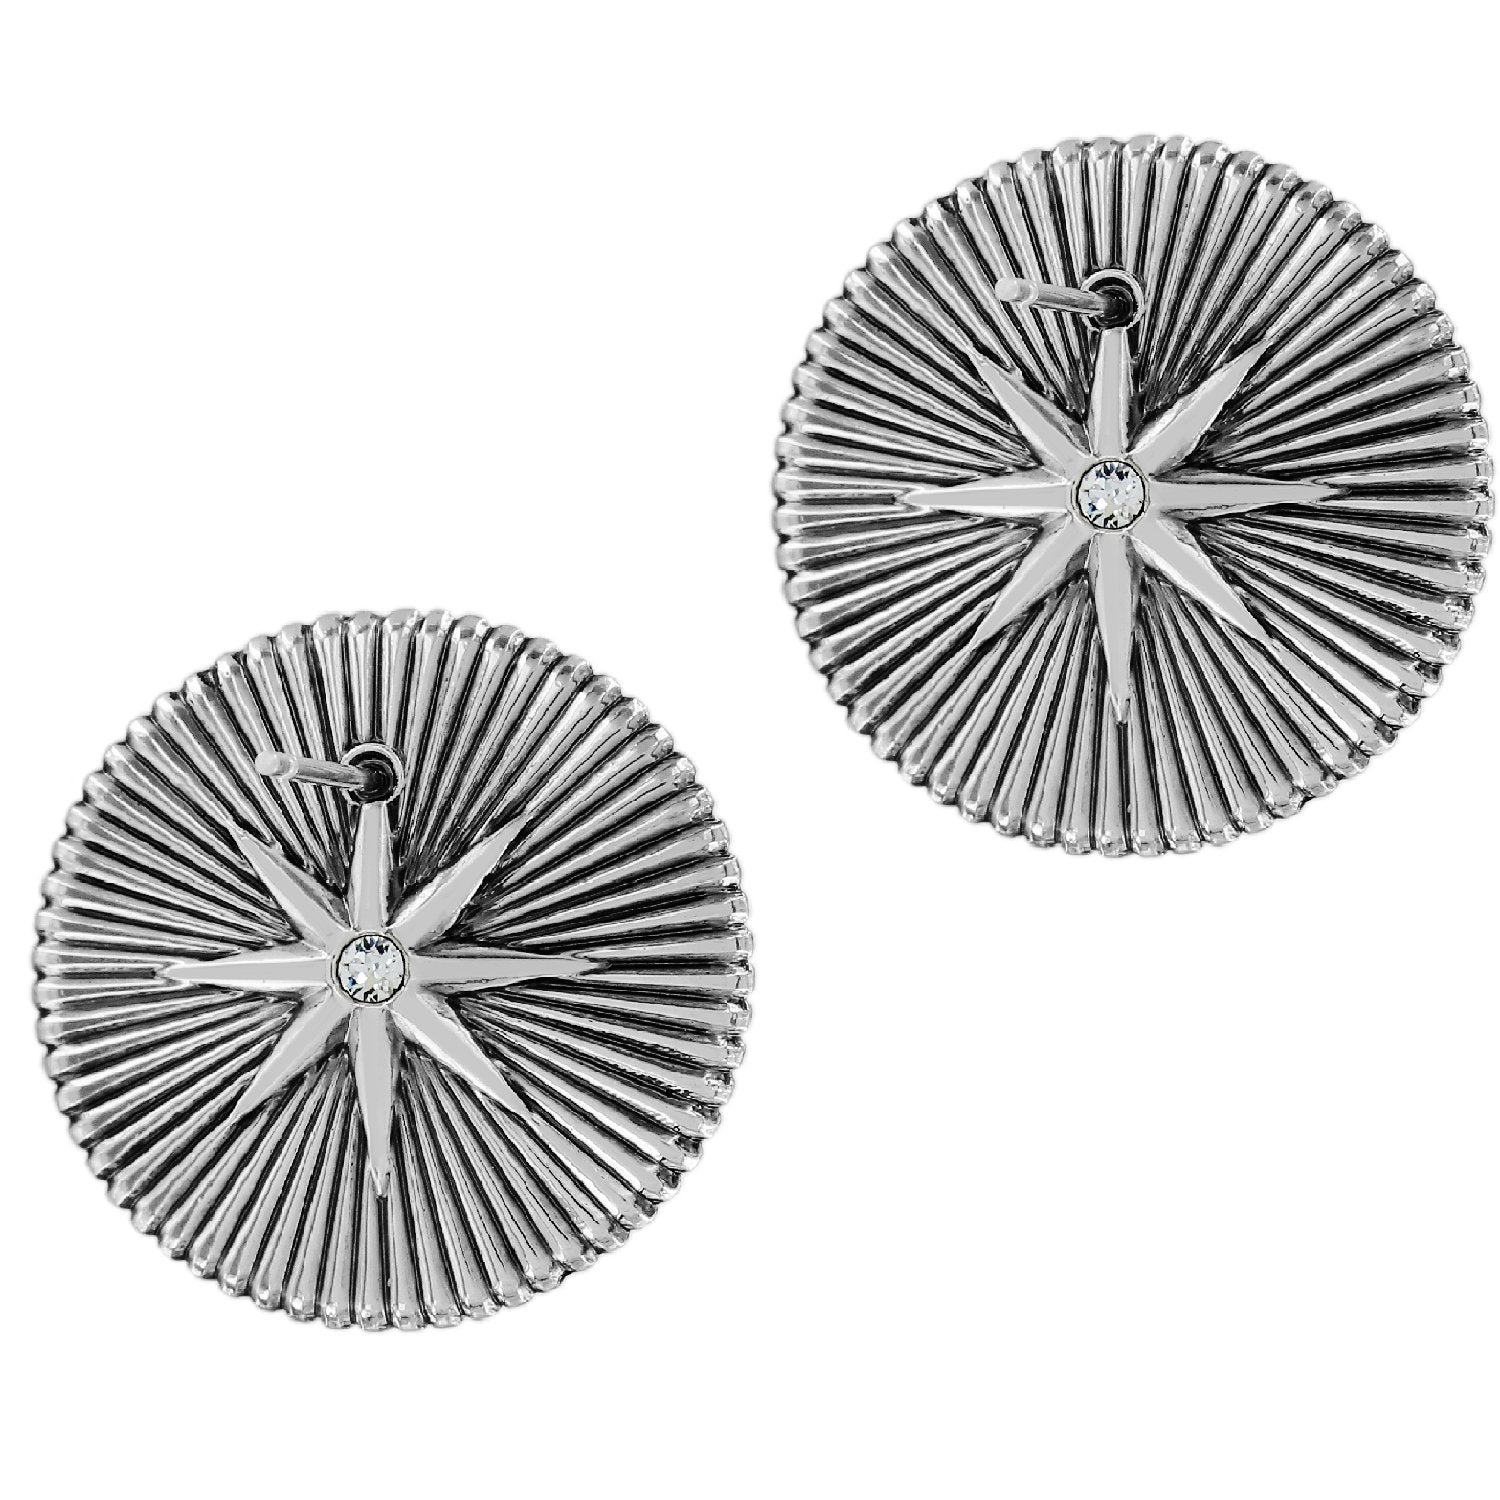 Halo Rays Round Post Earrings